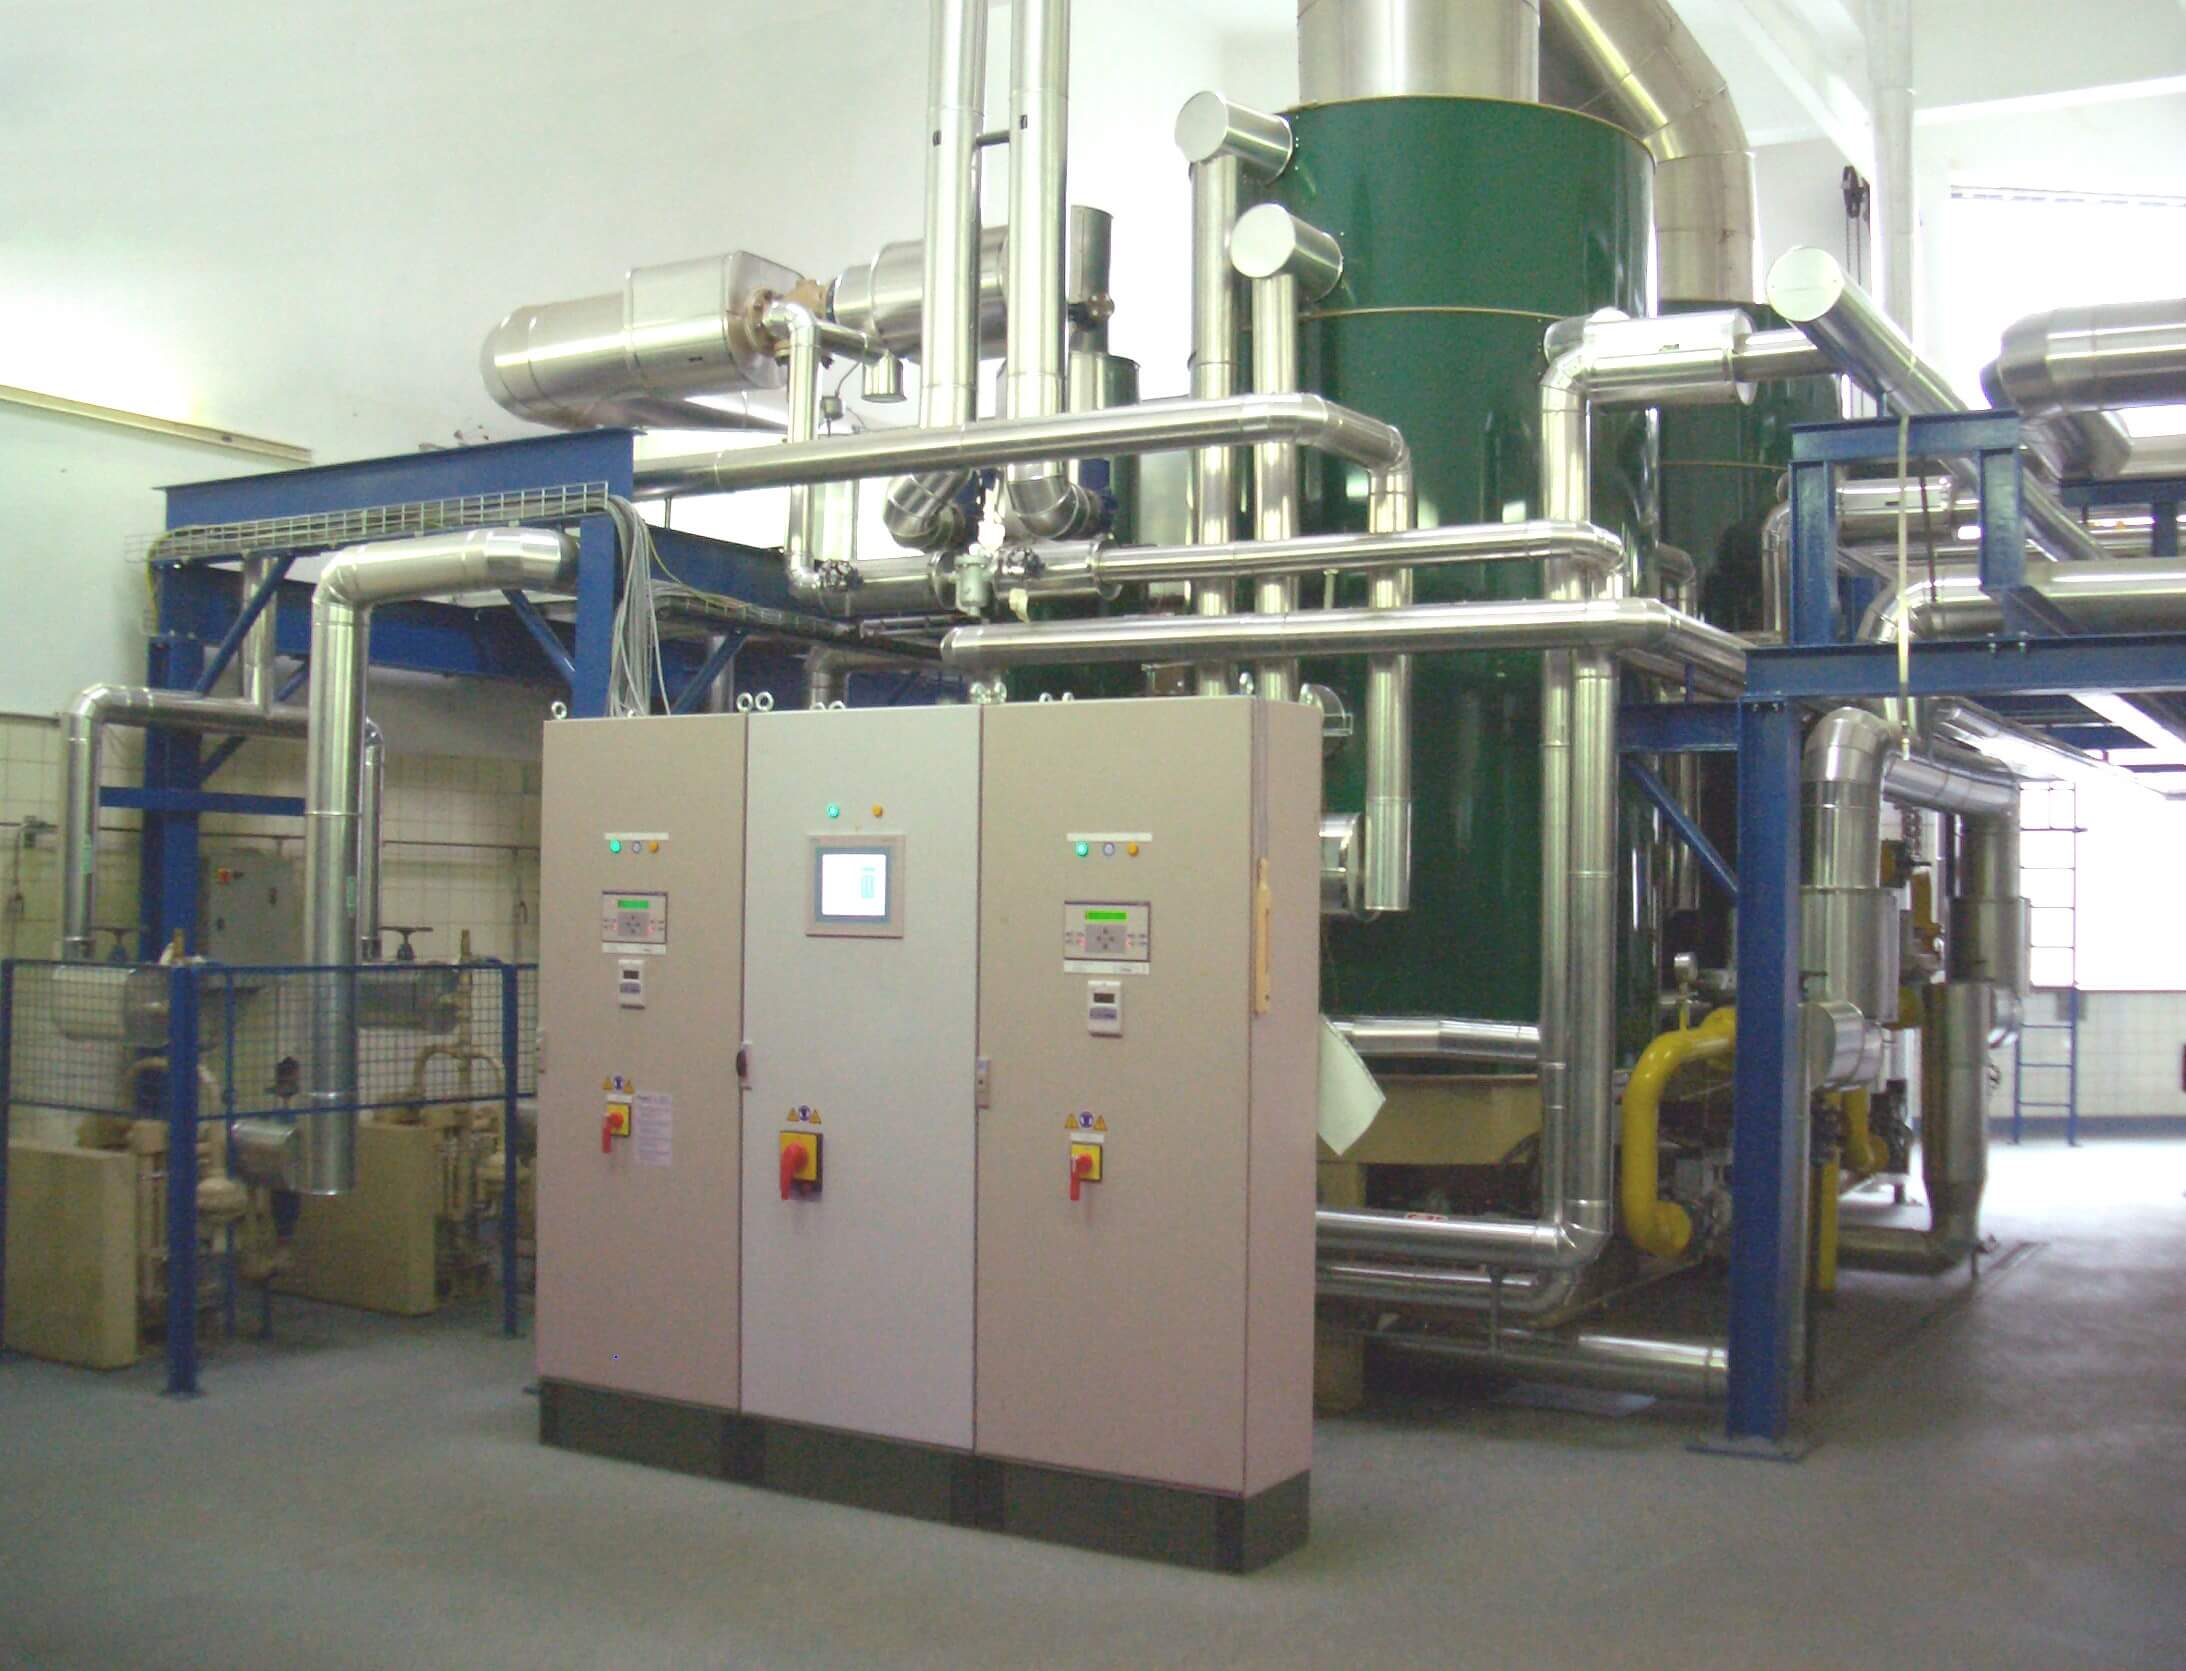 A Tannery in Germany now uses a Clayton Steam Generator